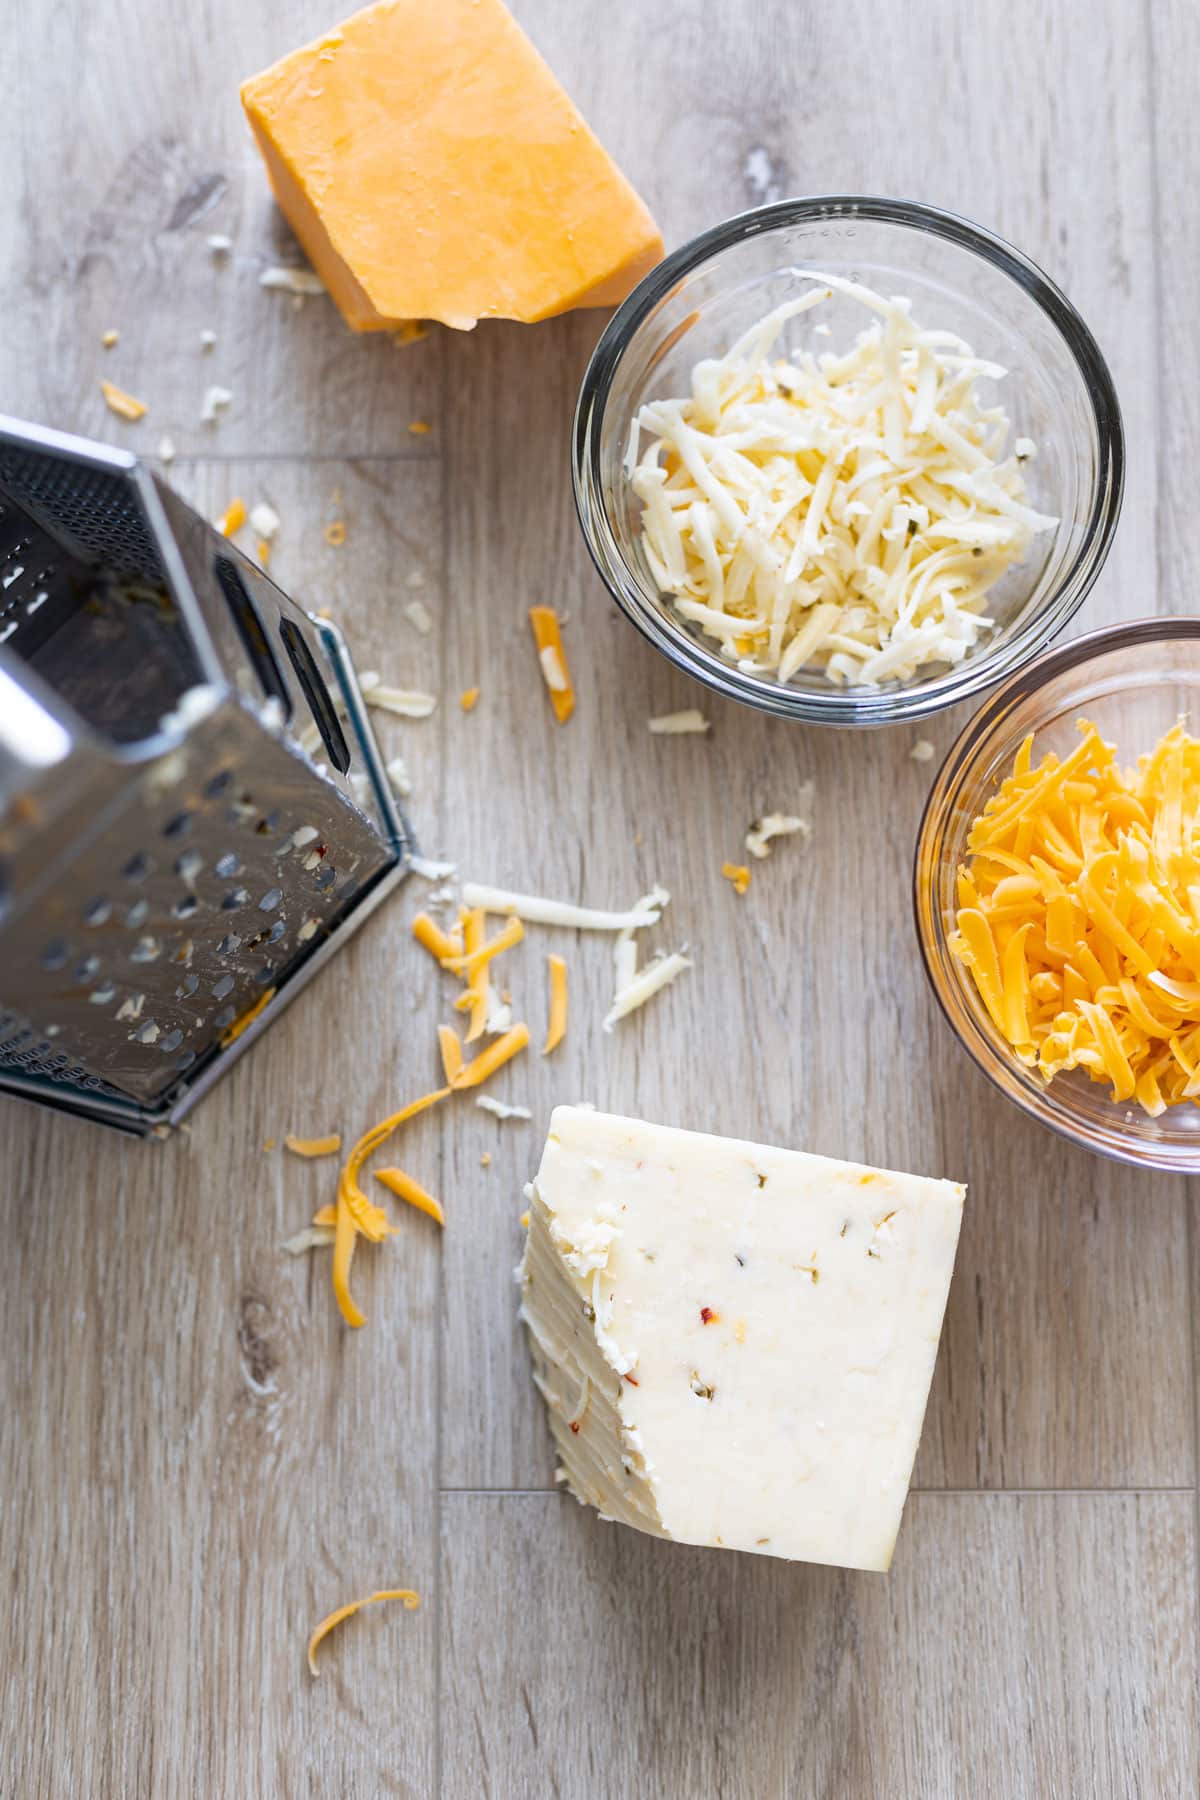 Shredding blocks of cheese with a cheese grader. 